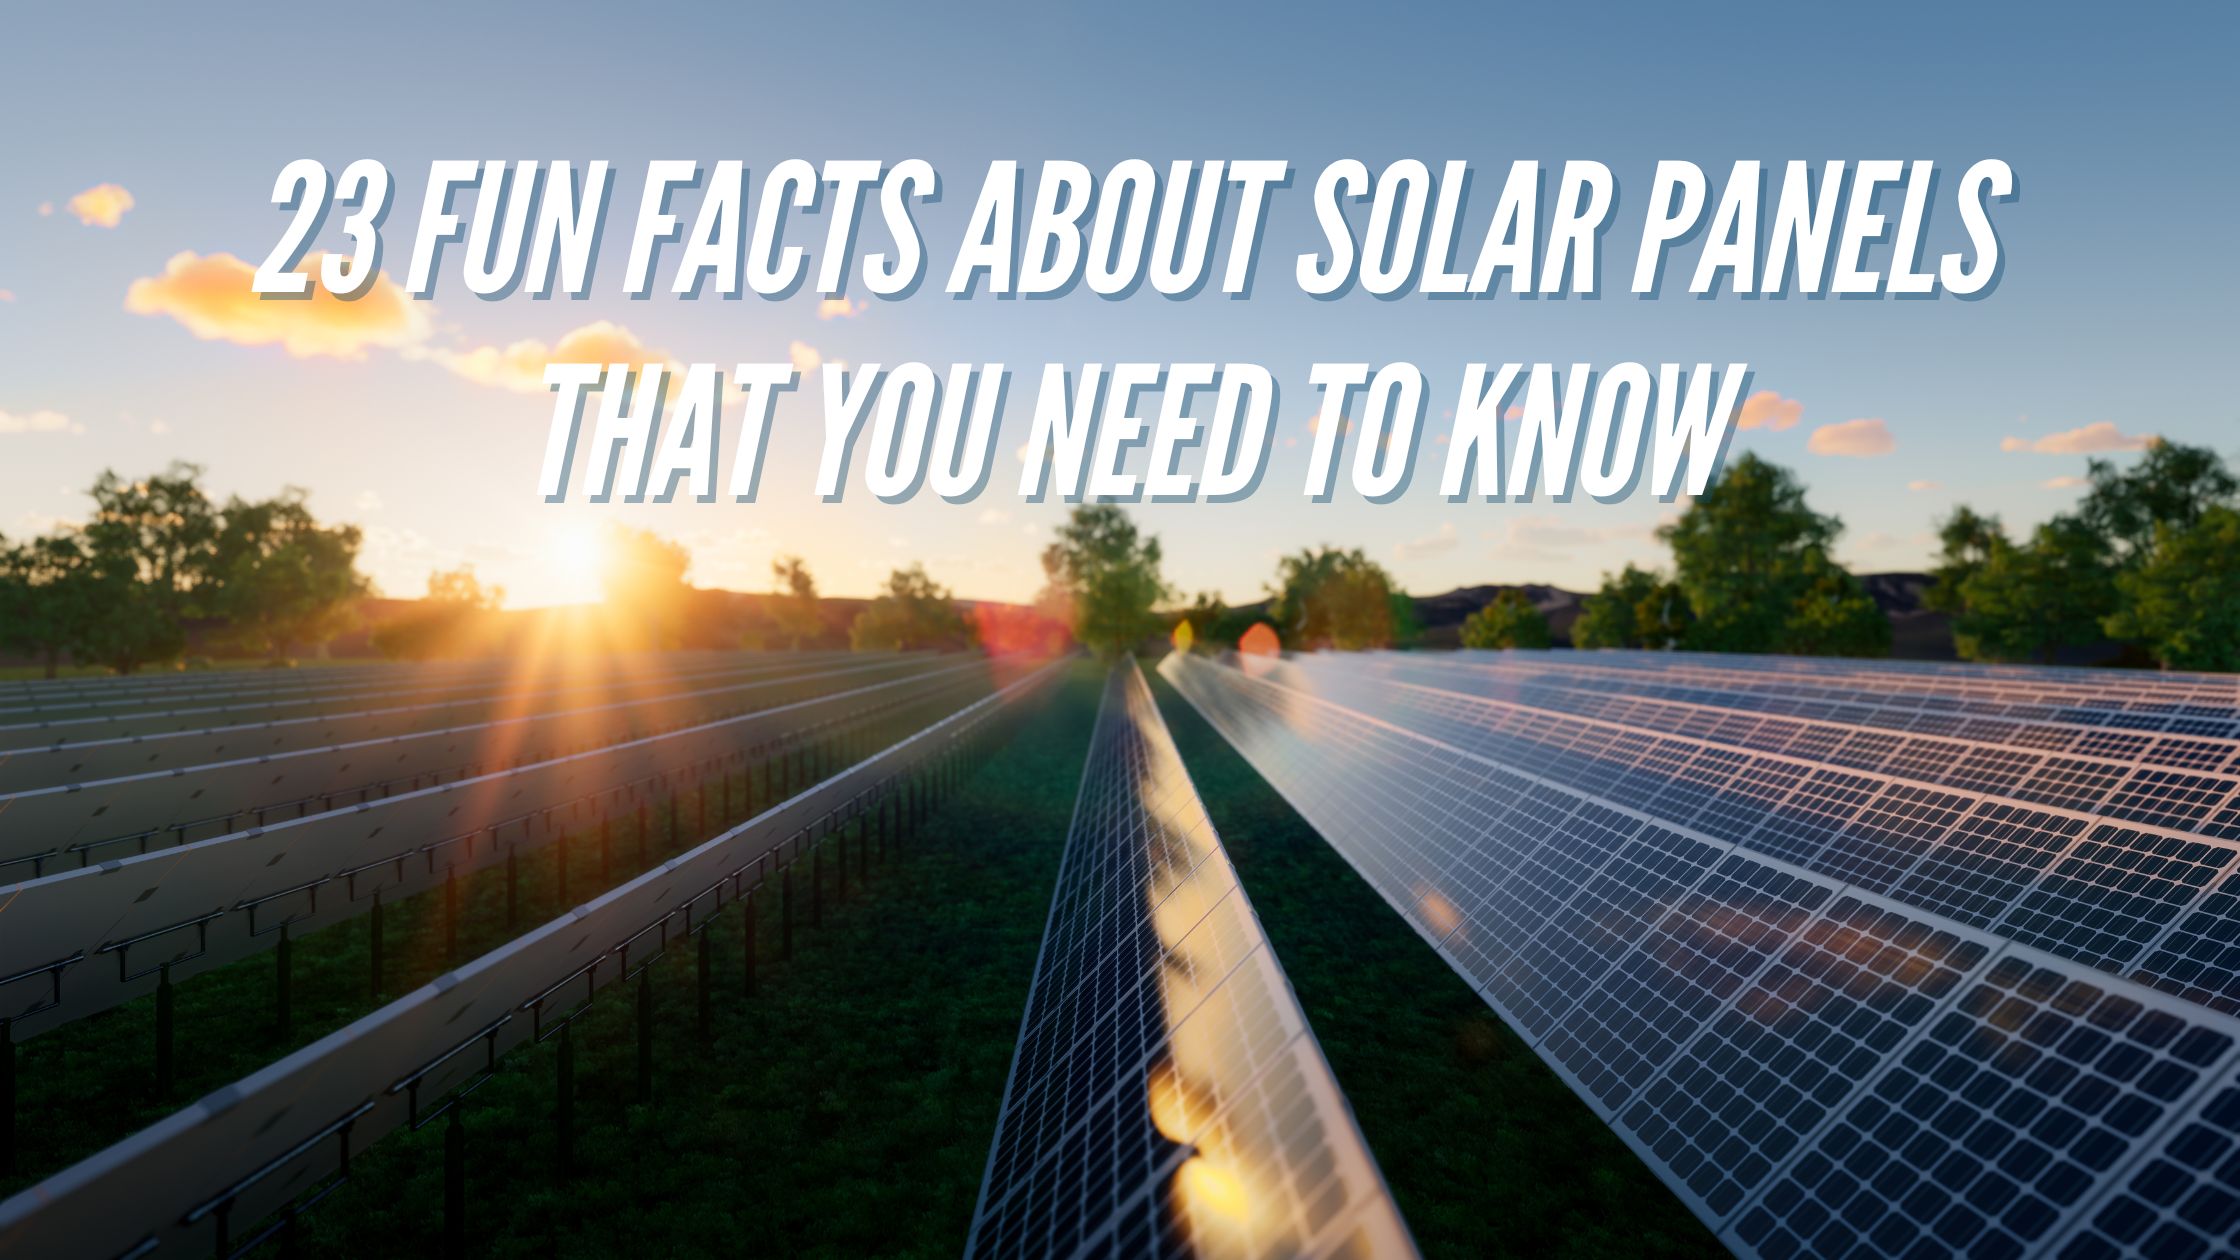 23-fun-facts-about-solar-panels-that-you-need-to-know